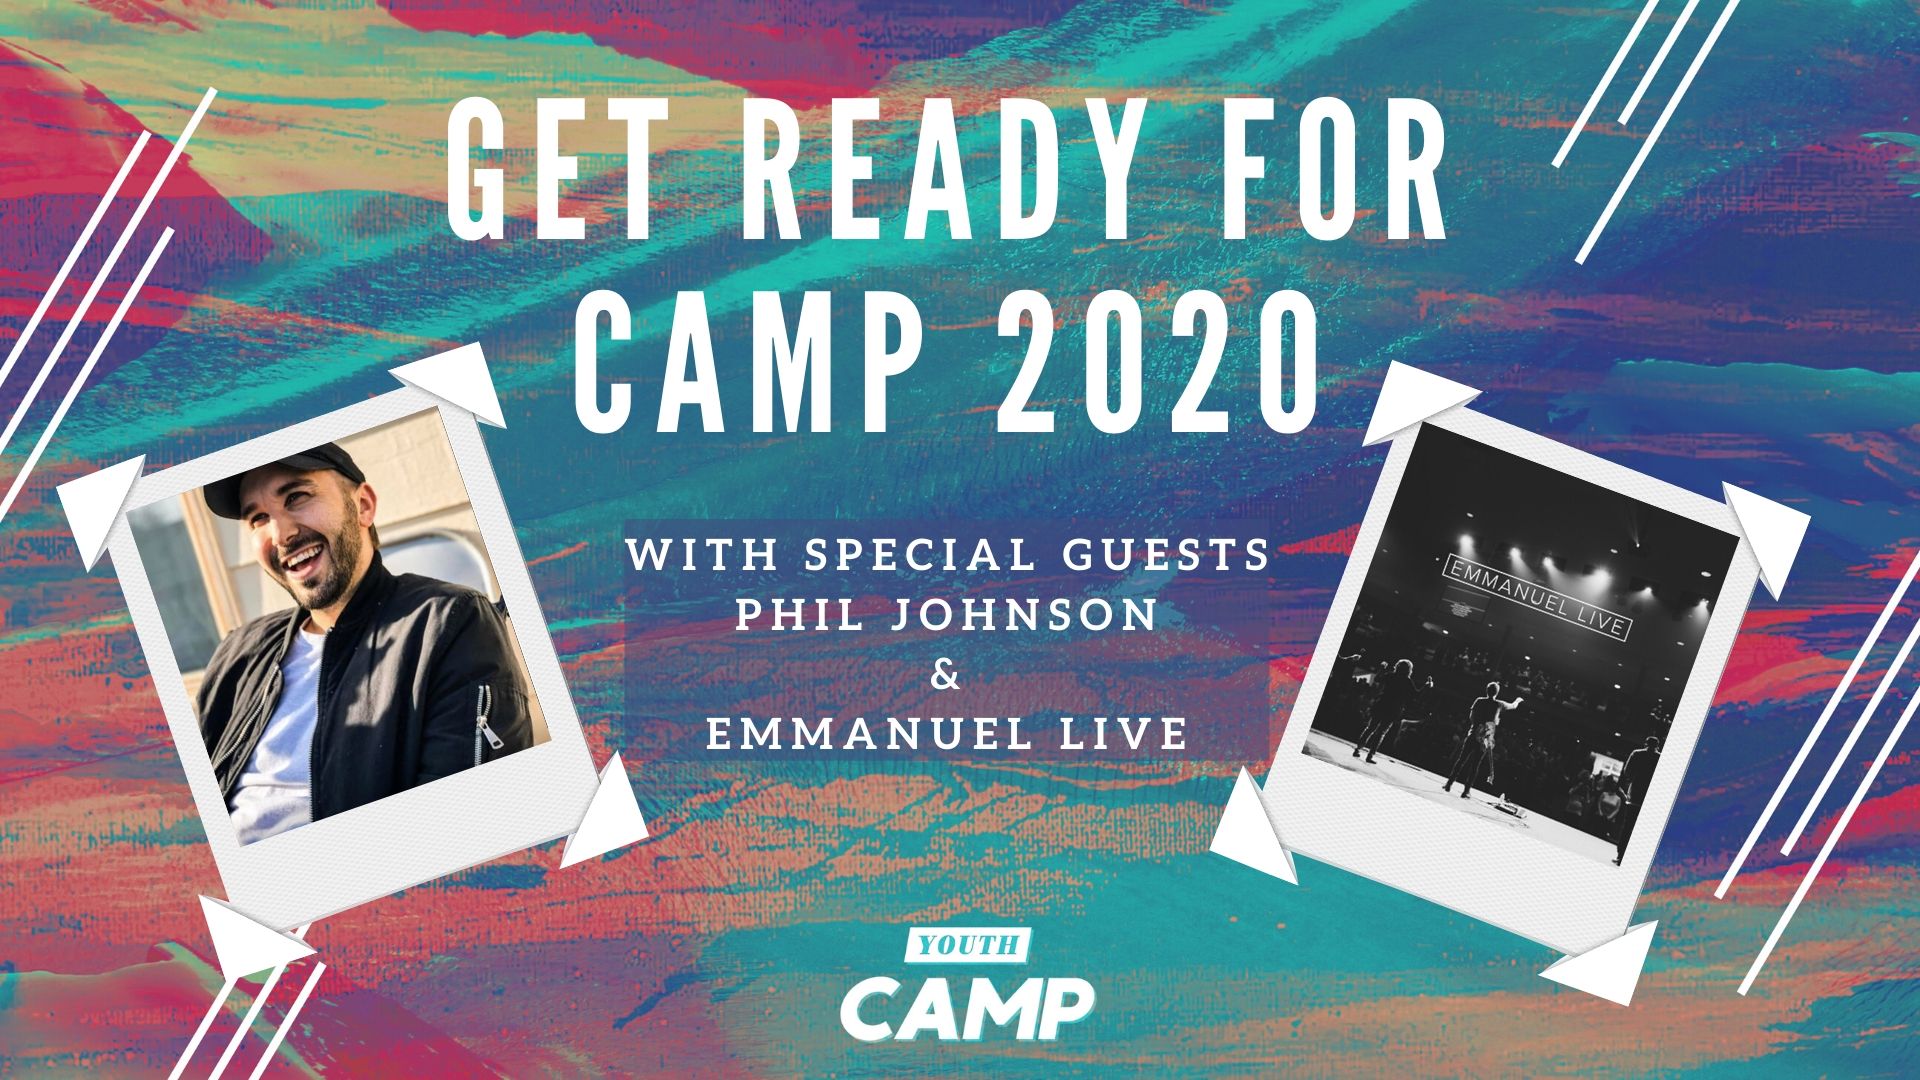 get ready for camp 2020 image